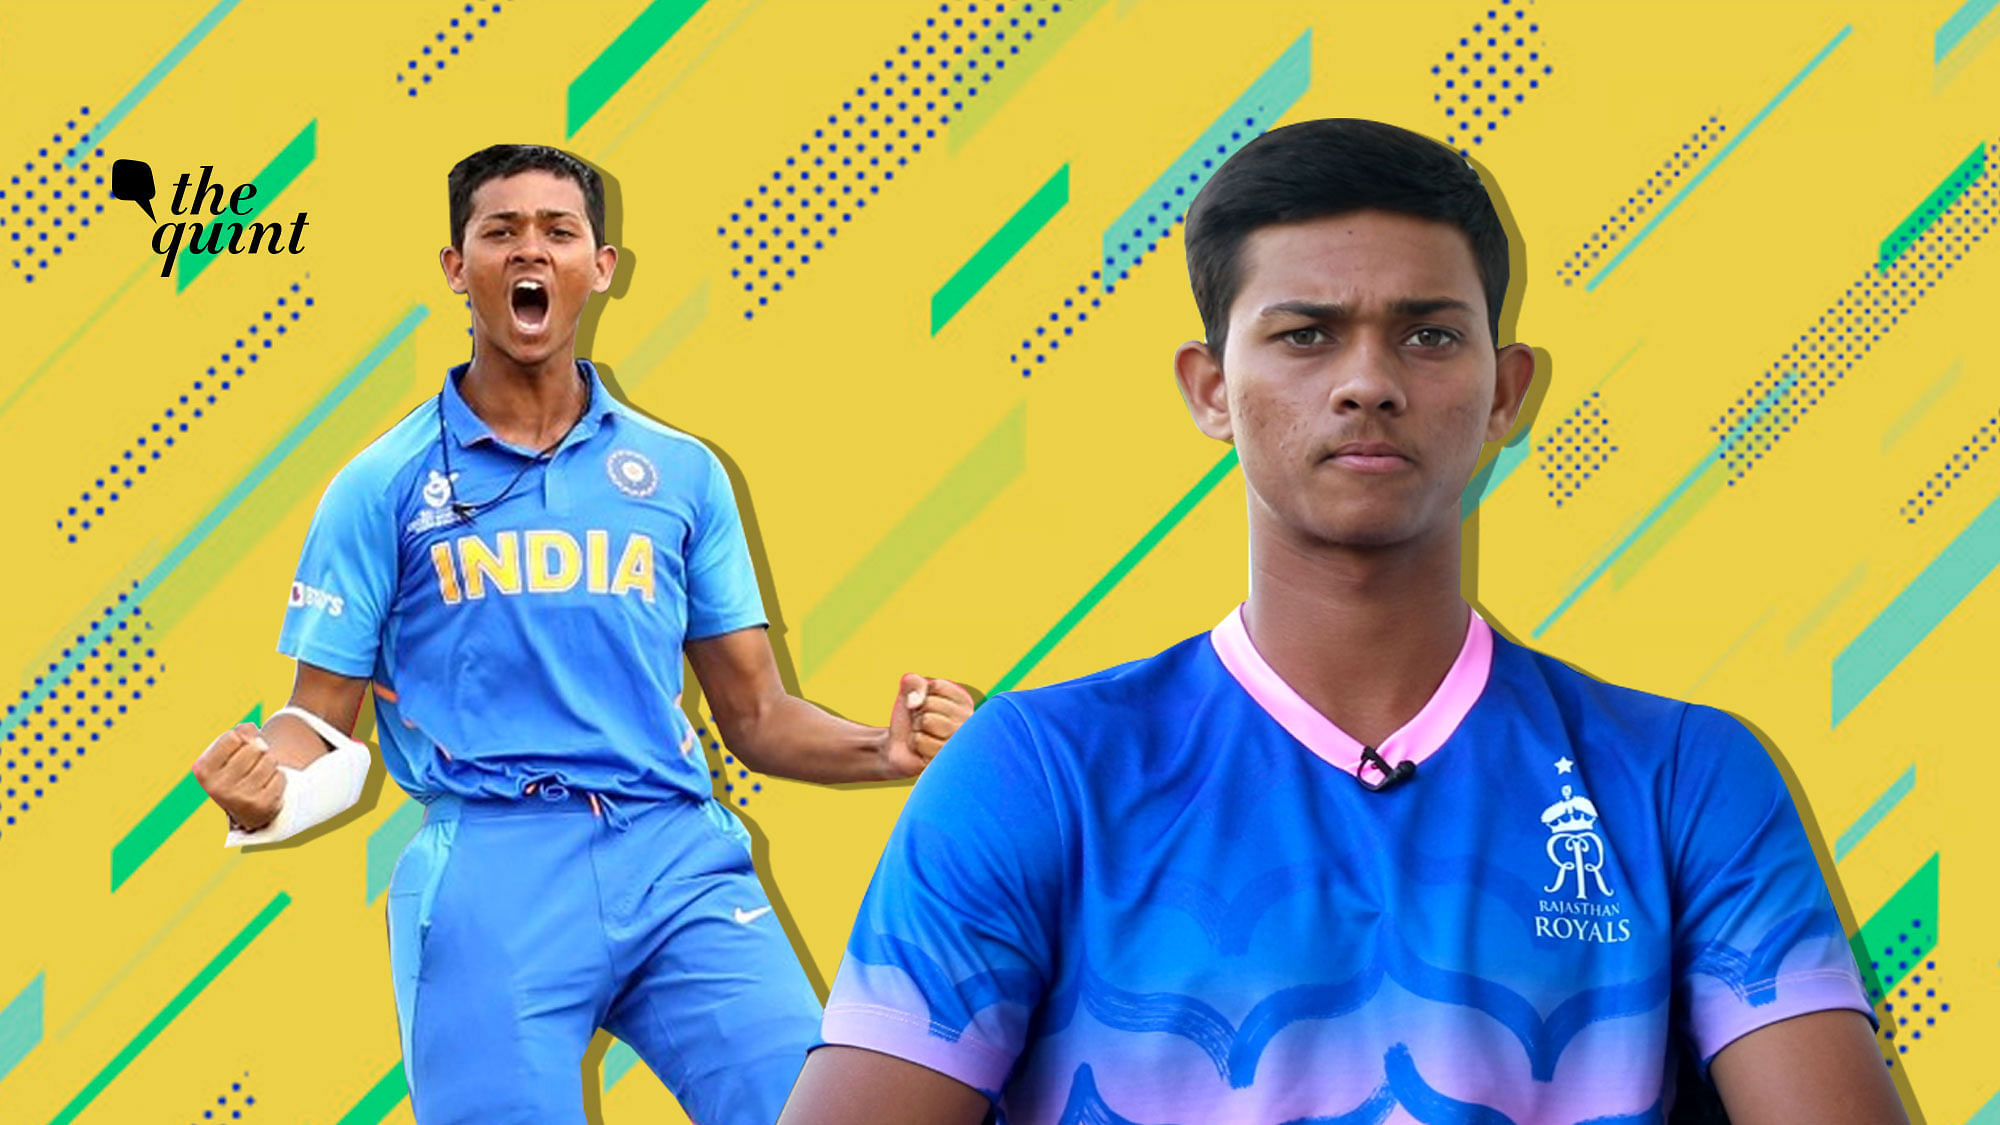 Yashasvi Jaiswal finished the U-19 World Cup as the Player of the Tournament and will now play for Rajasthan Royals in IPL.